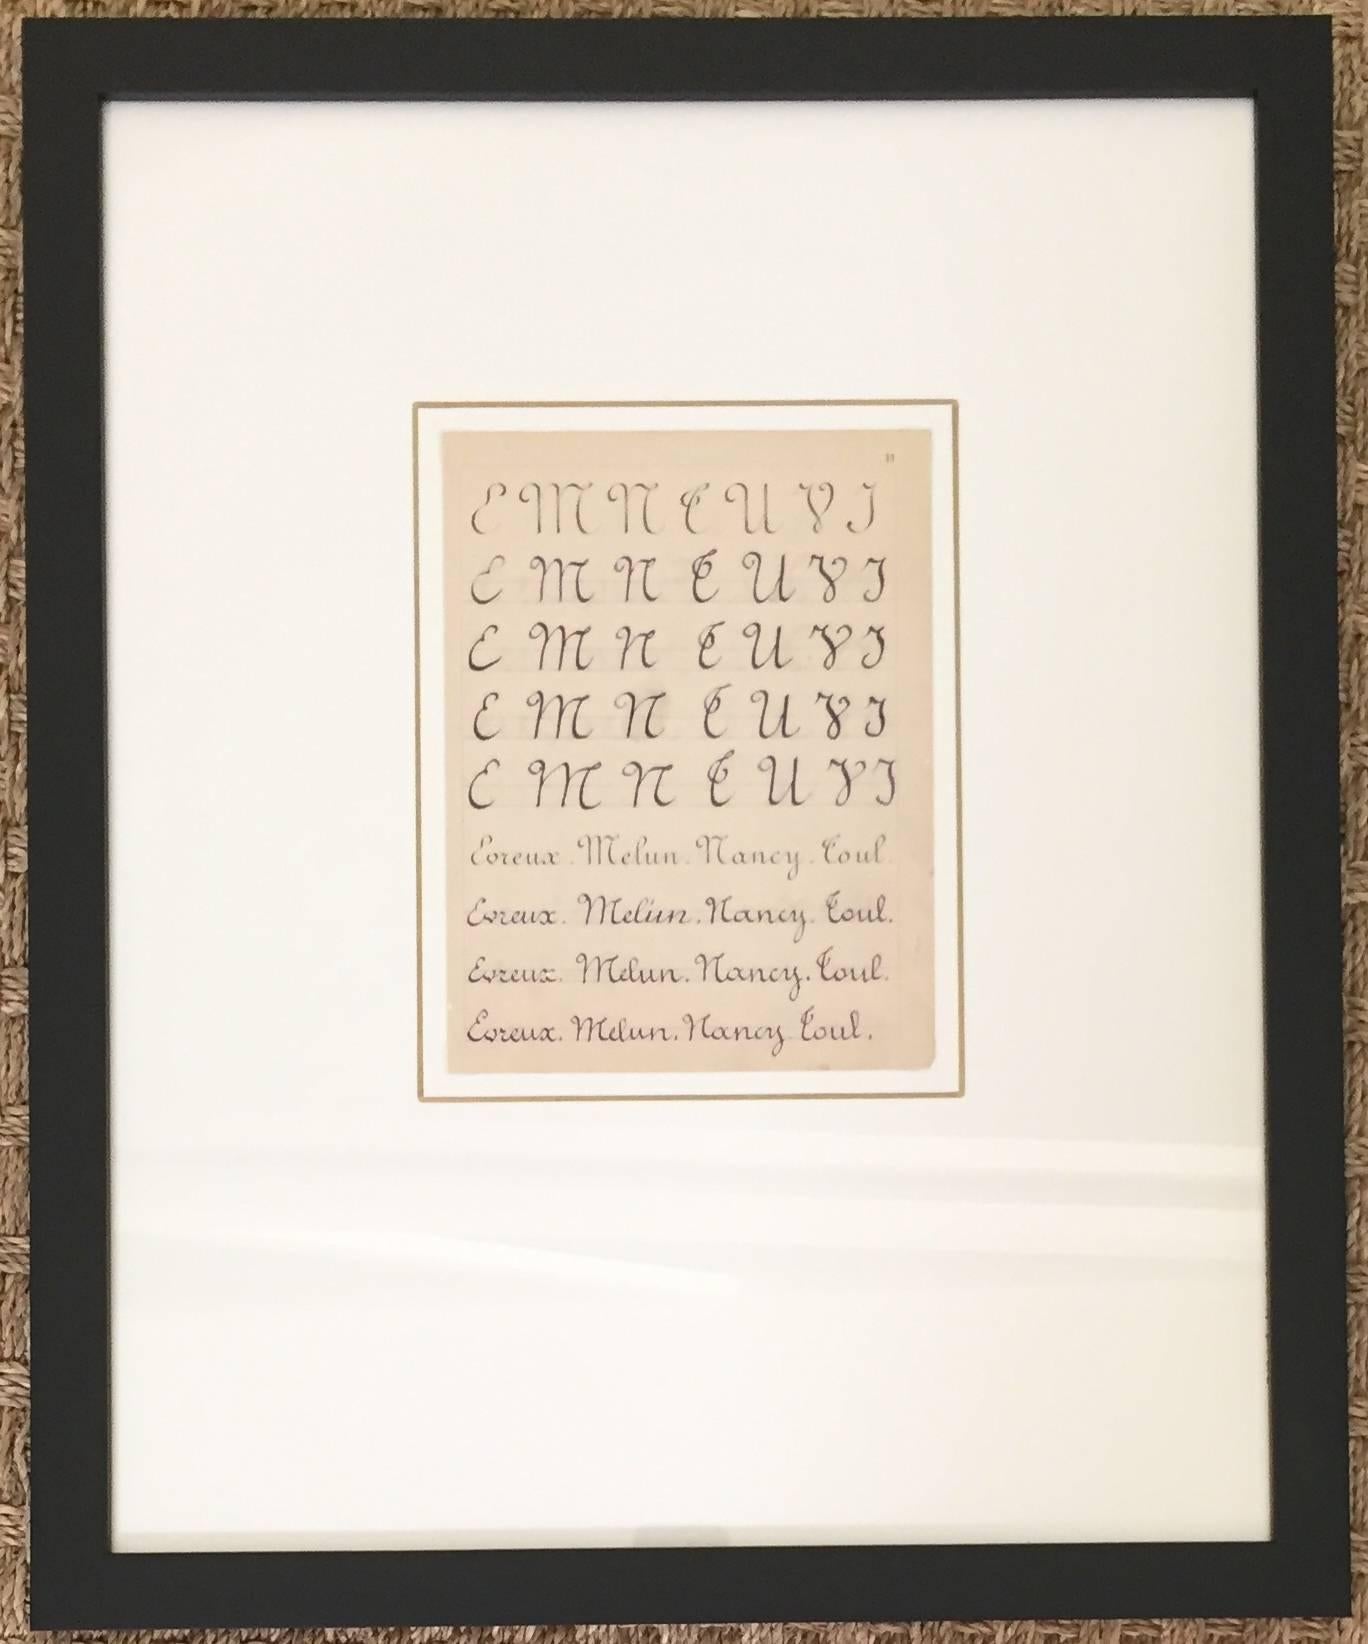 Collection of French alphabet lessons framed in black square frames.